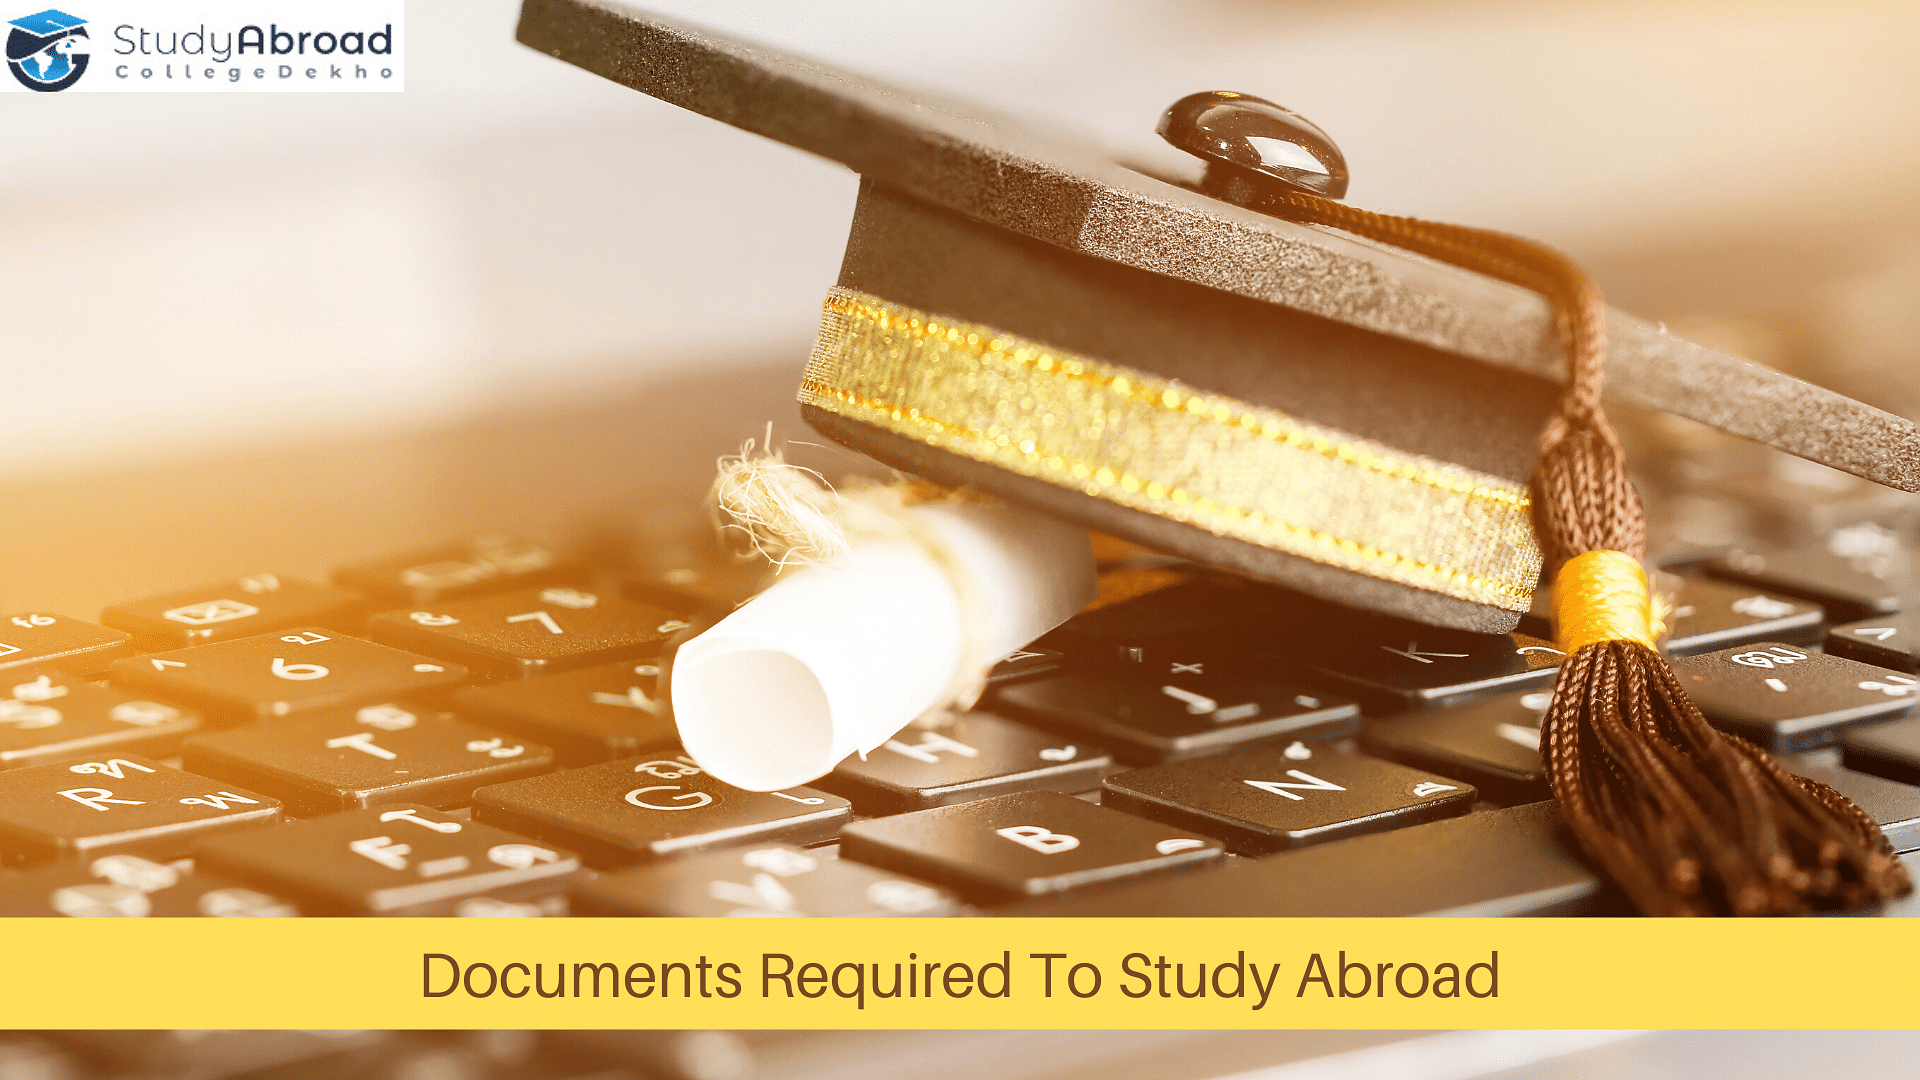 Documents Required to Study Abroad